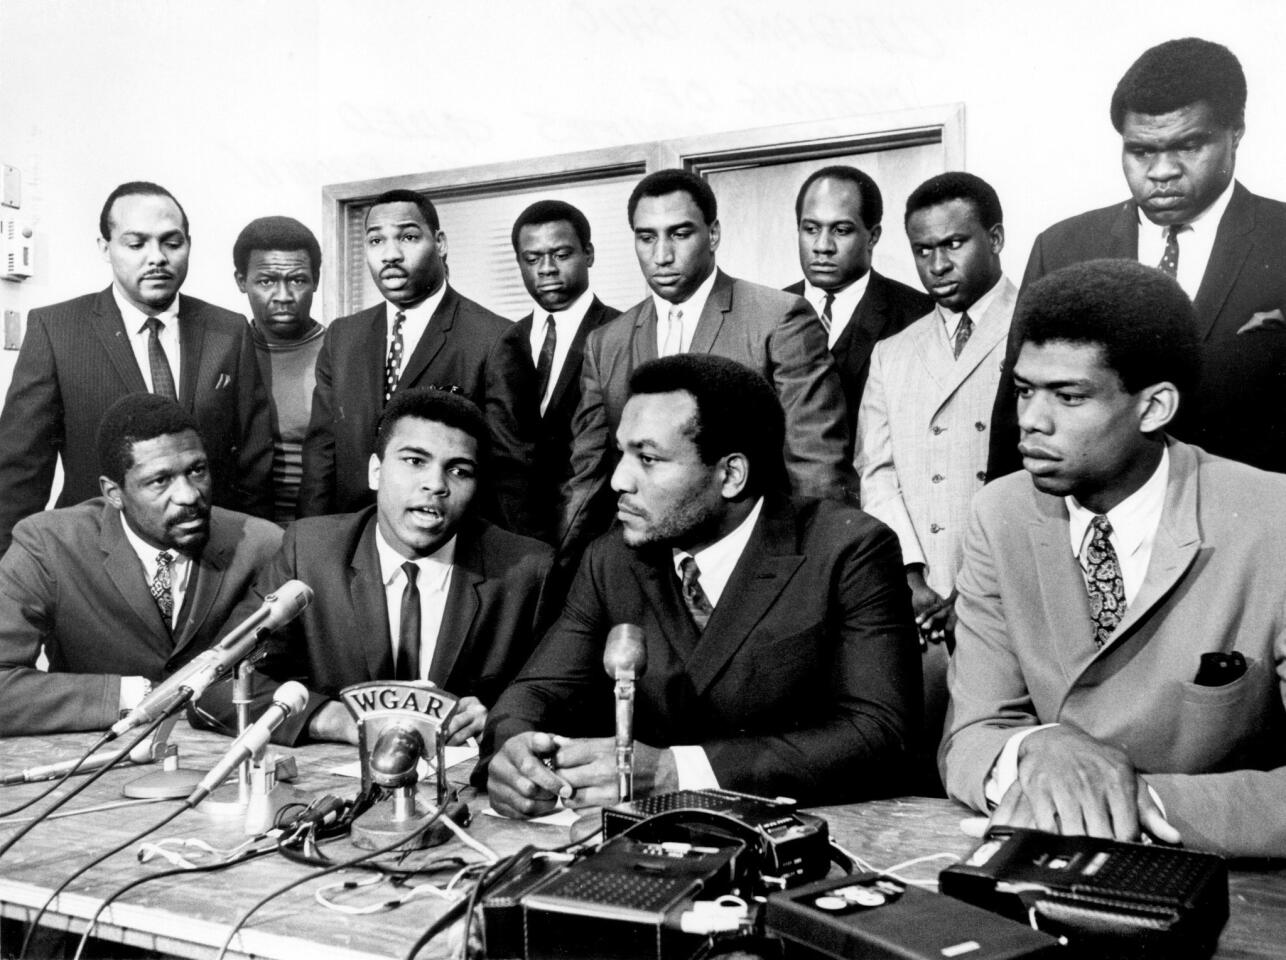 Former Cleveland Browns Hall of Fame running back Jim Brown presides over a meeting of top African American athletes in 1967.